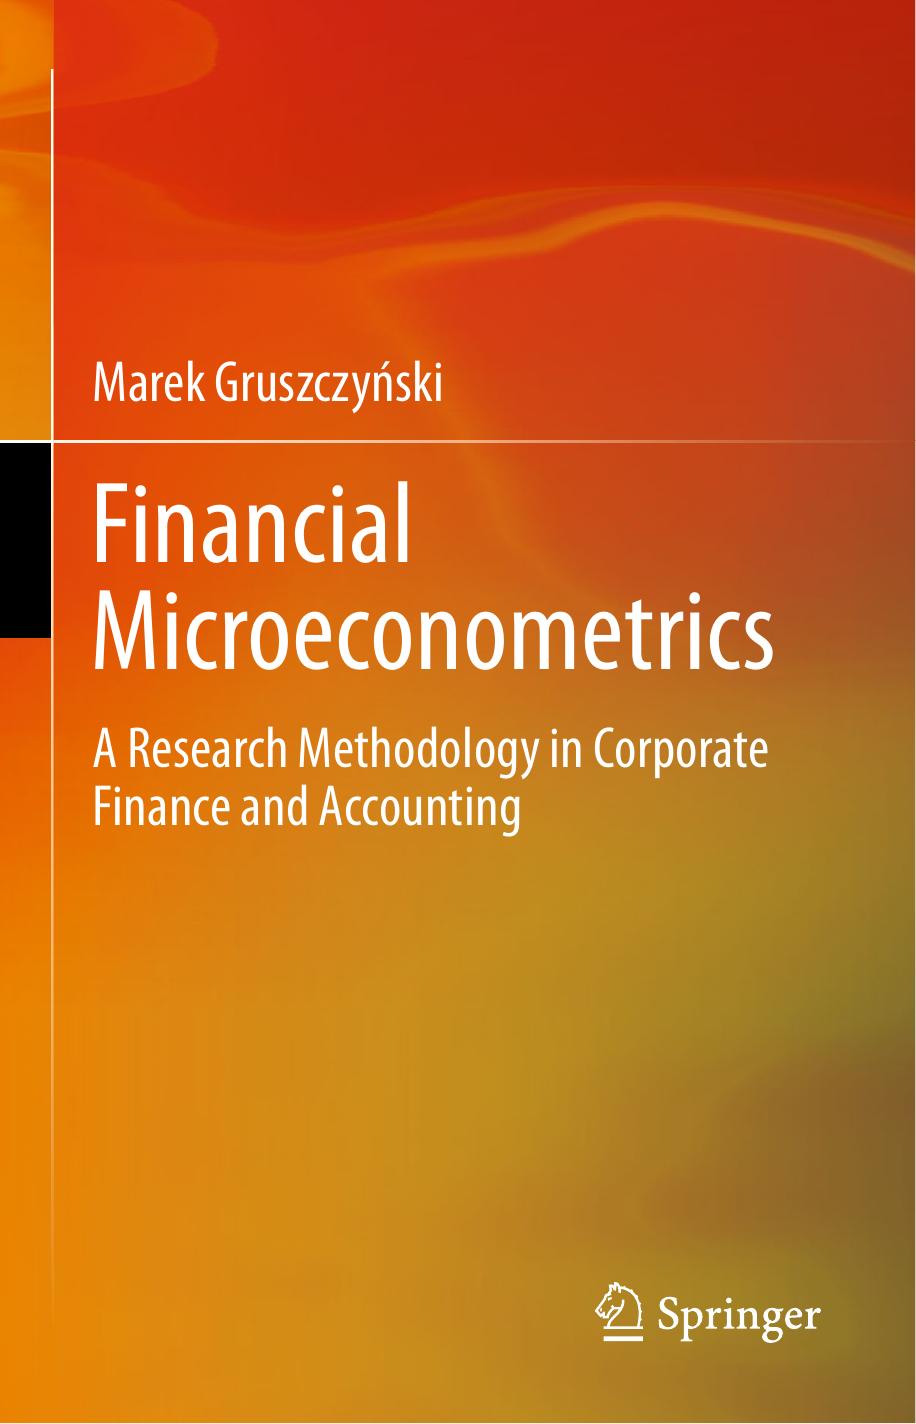 Financial Microeconometrics  A Research Methodology in Corporate Finance and Accounting, (2020)